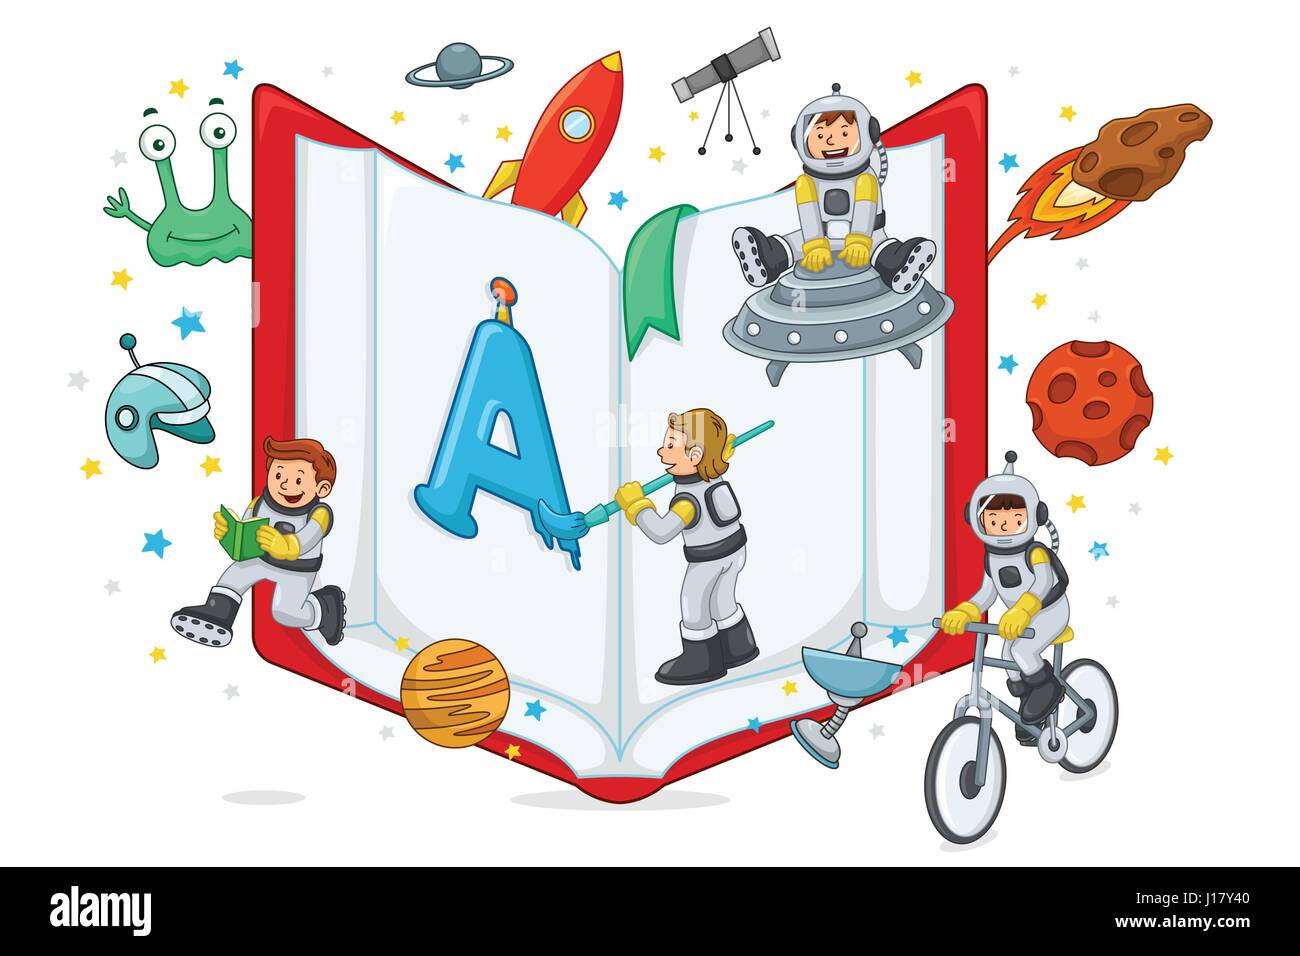 Kids showing open book Royalty Free Vector Image